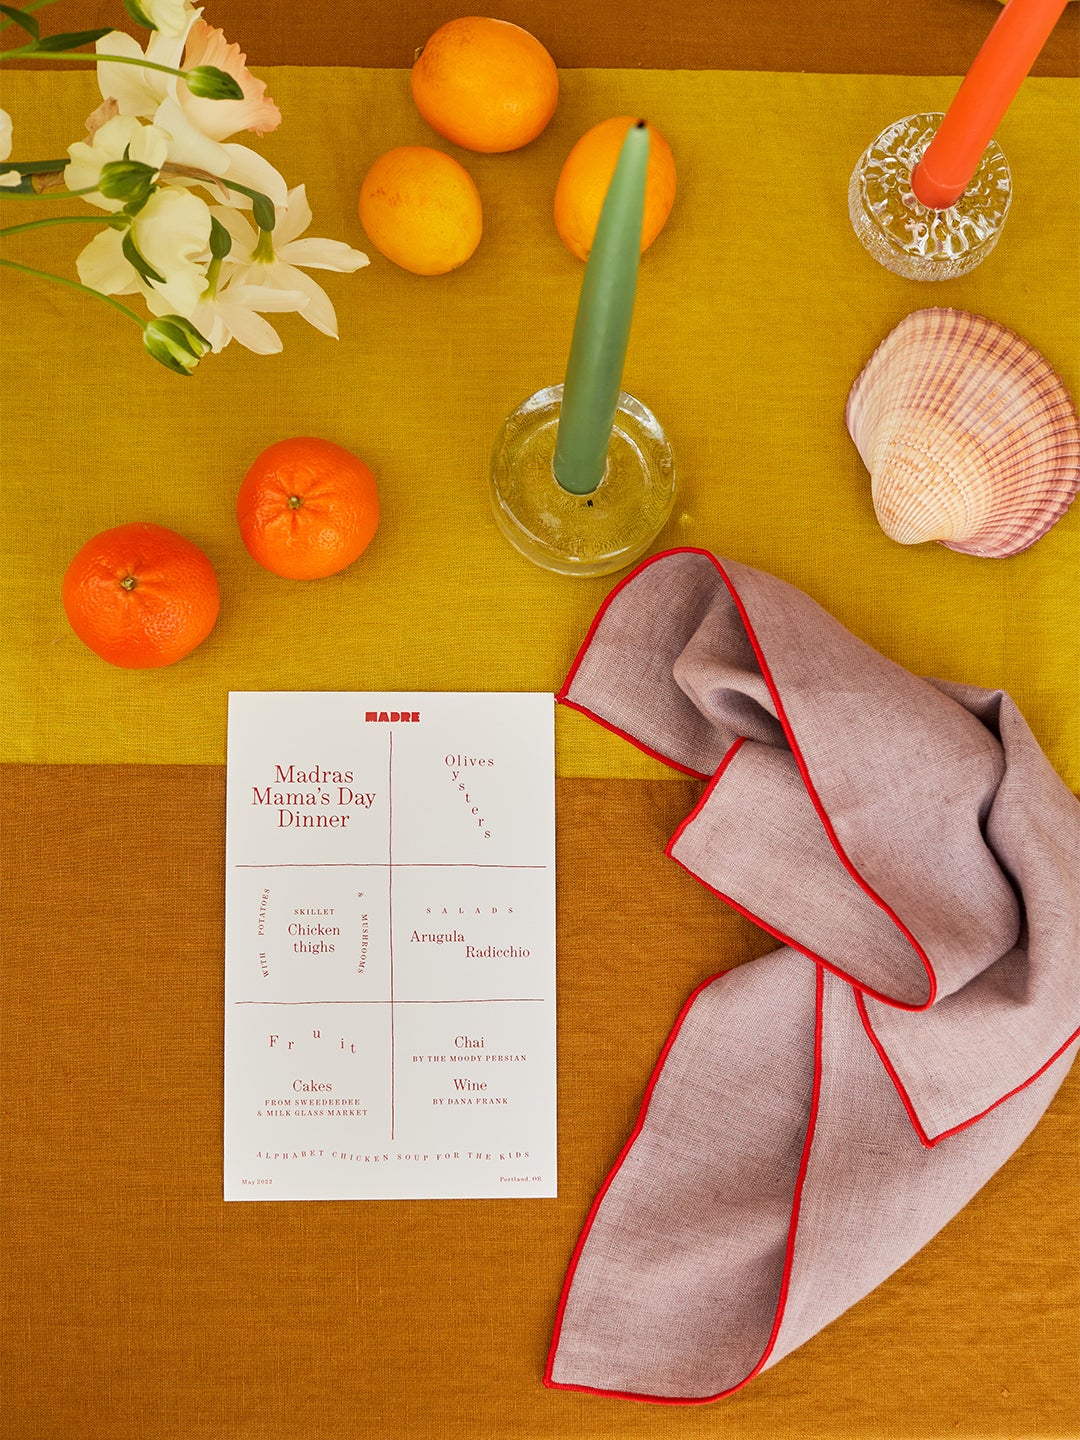 Menu and napkin on a table